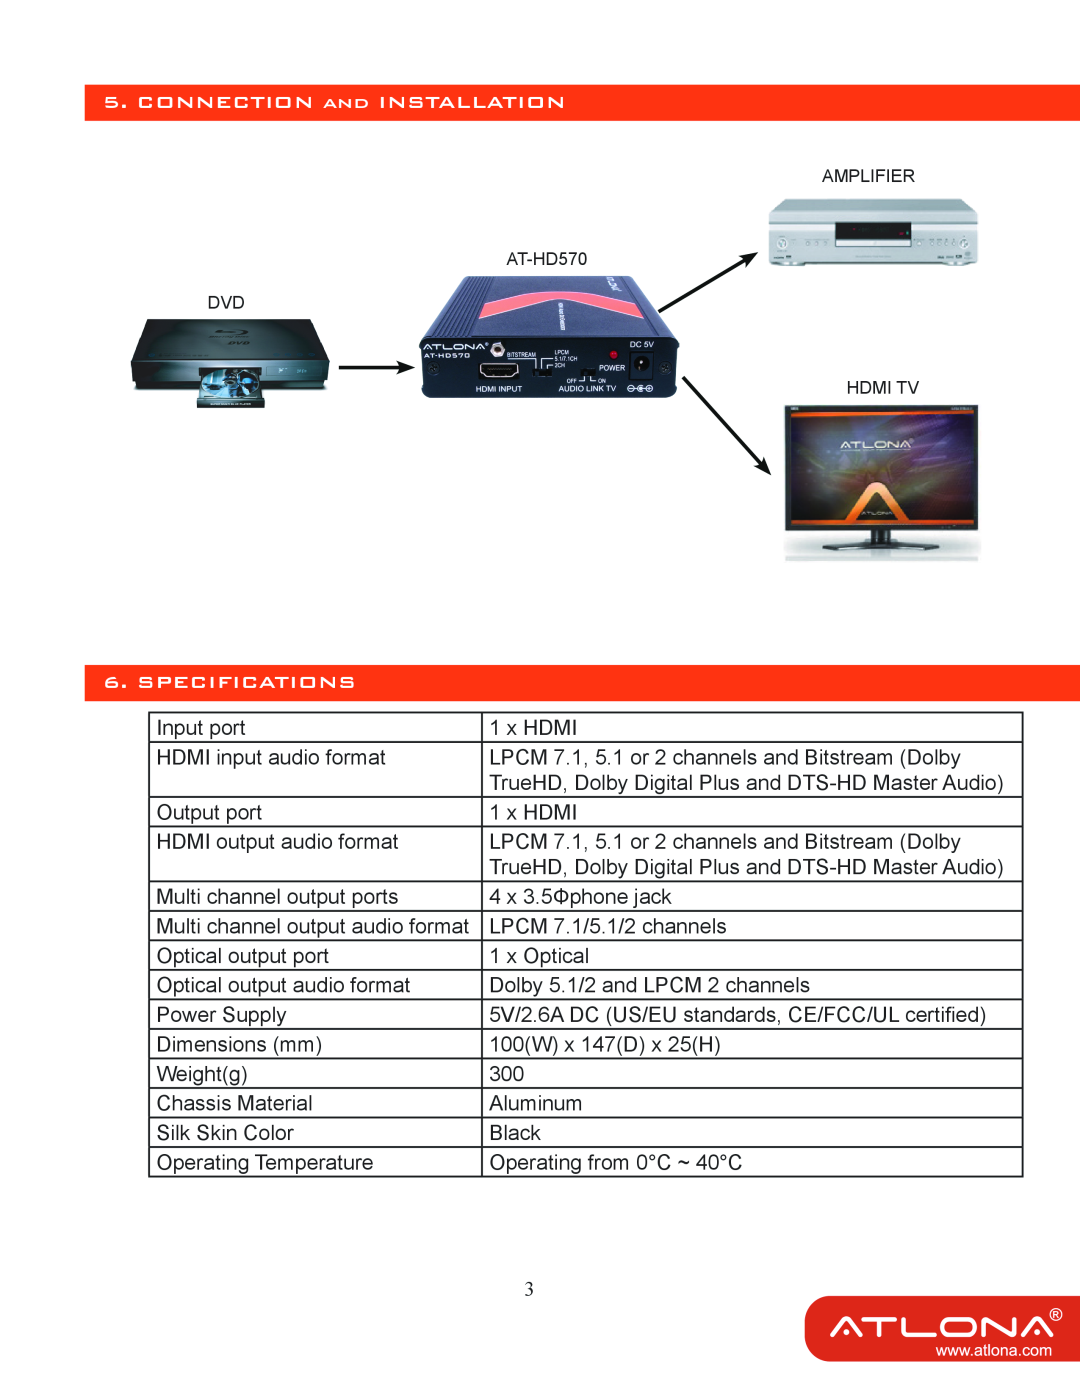 Atlona user manual Connection And Installation, Specifications, AMPLIFIER AT-HD570 DVD HDMI TV 